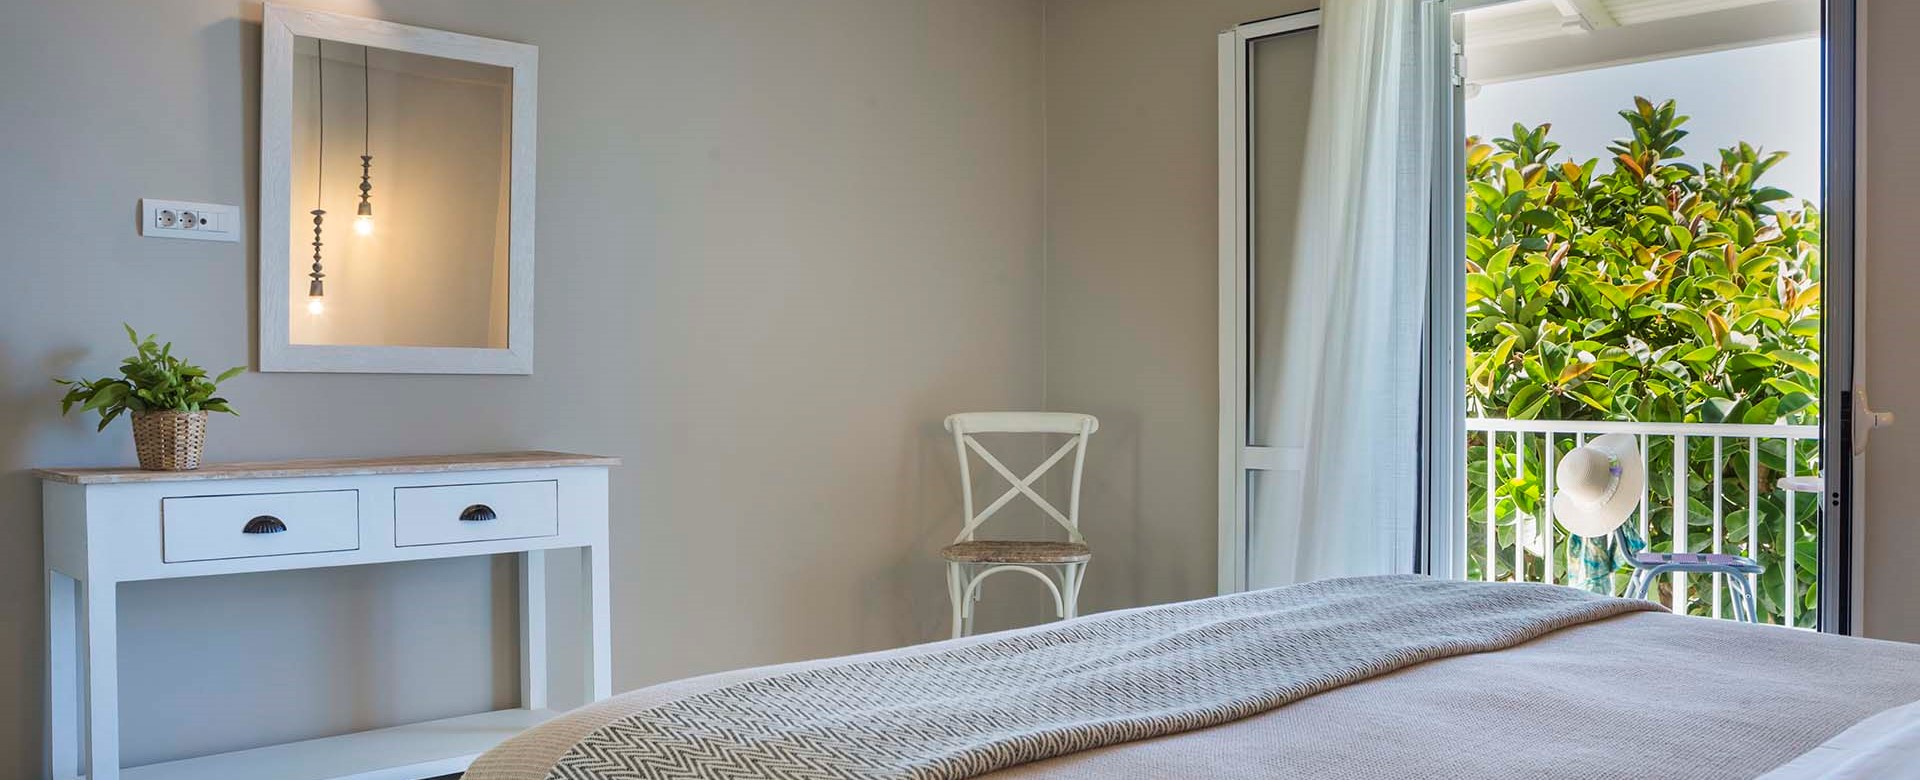 Double bed and French doors onto the balcony with views of the sea at Beachfront Suite No4, Lourdata, Kefalonia